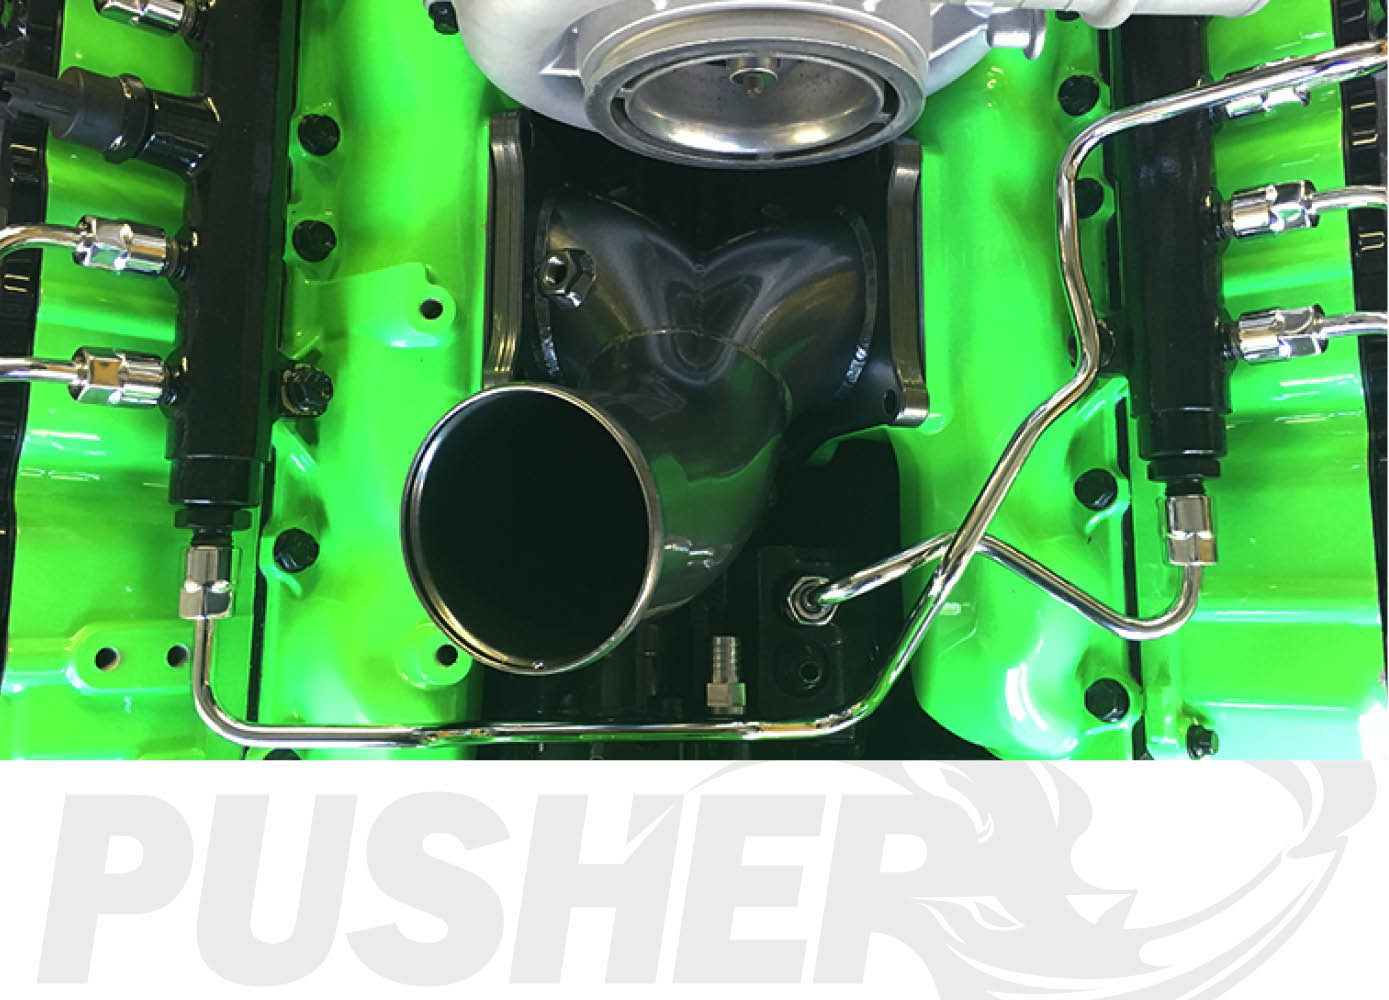 Pusher SuperMax Intake System & Pusher Max 3" Driver-side Charge Tube for 2006-2010 Duramax LBZ/LMM Trucks